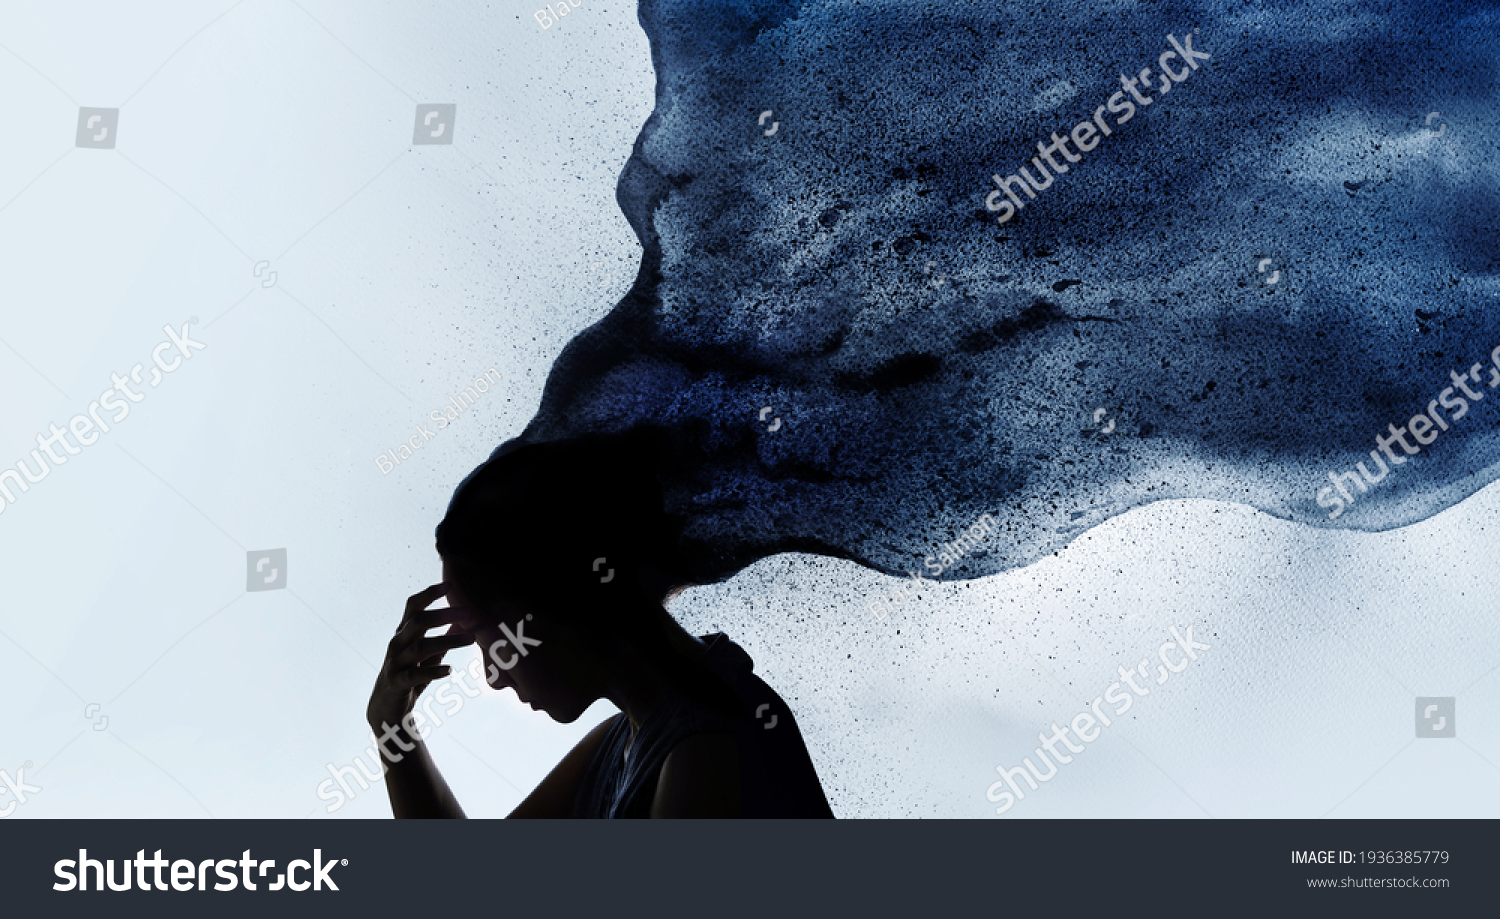 Mental Health Disorder Concept. Exhausted Depressed Female touching Forehead. Stressed Woman Silhouette photo combined with Watercolor. Depression Psychology inside her Head #1936385779